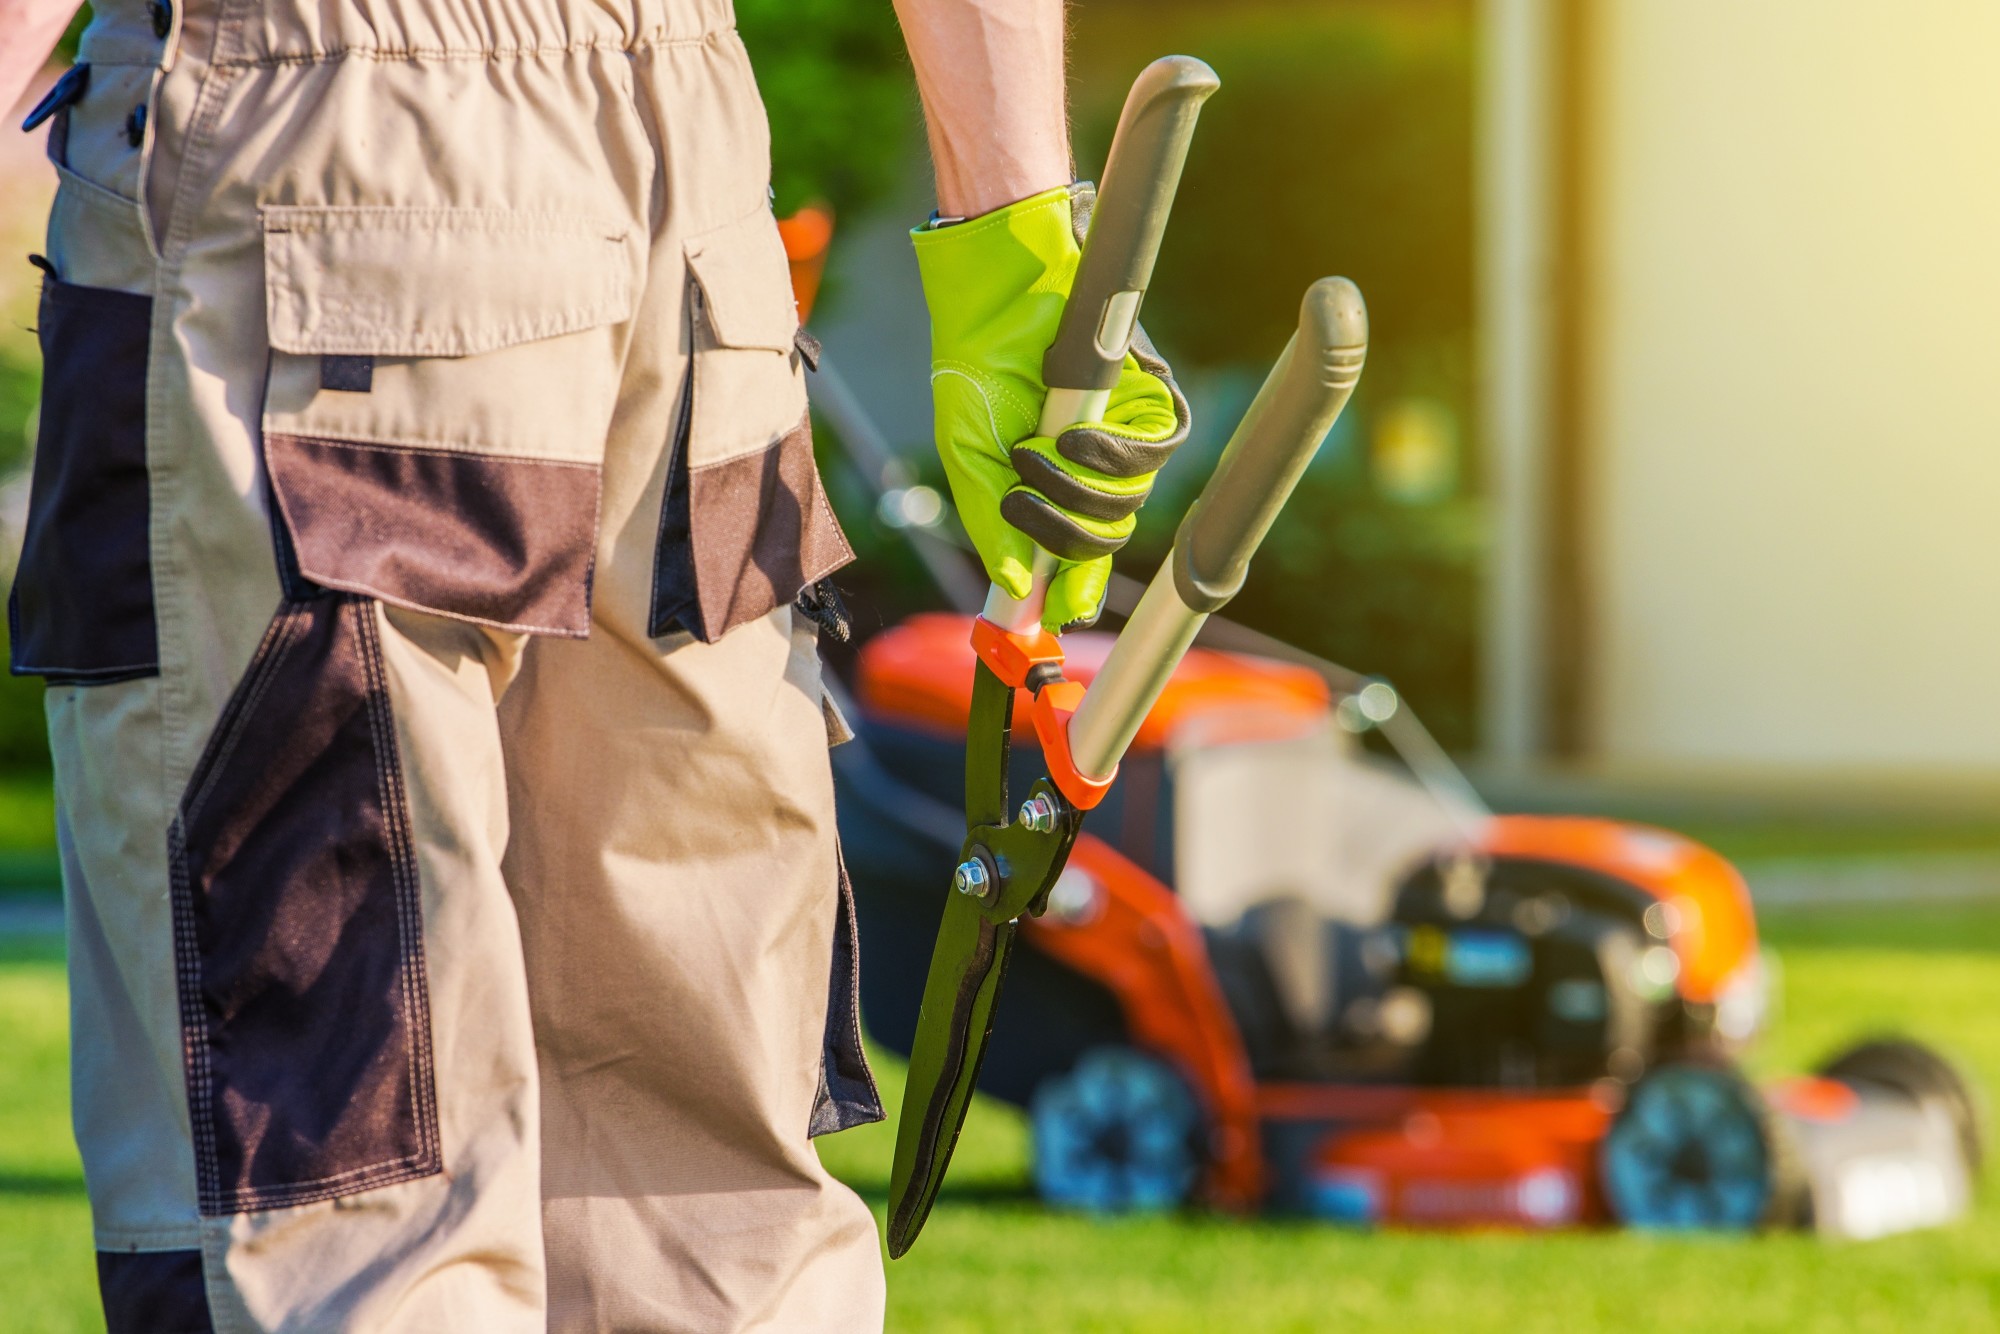 Landscaping Professional. Pro Gardener with Large Scissors and Other Gardening Equipment.